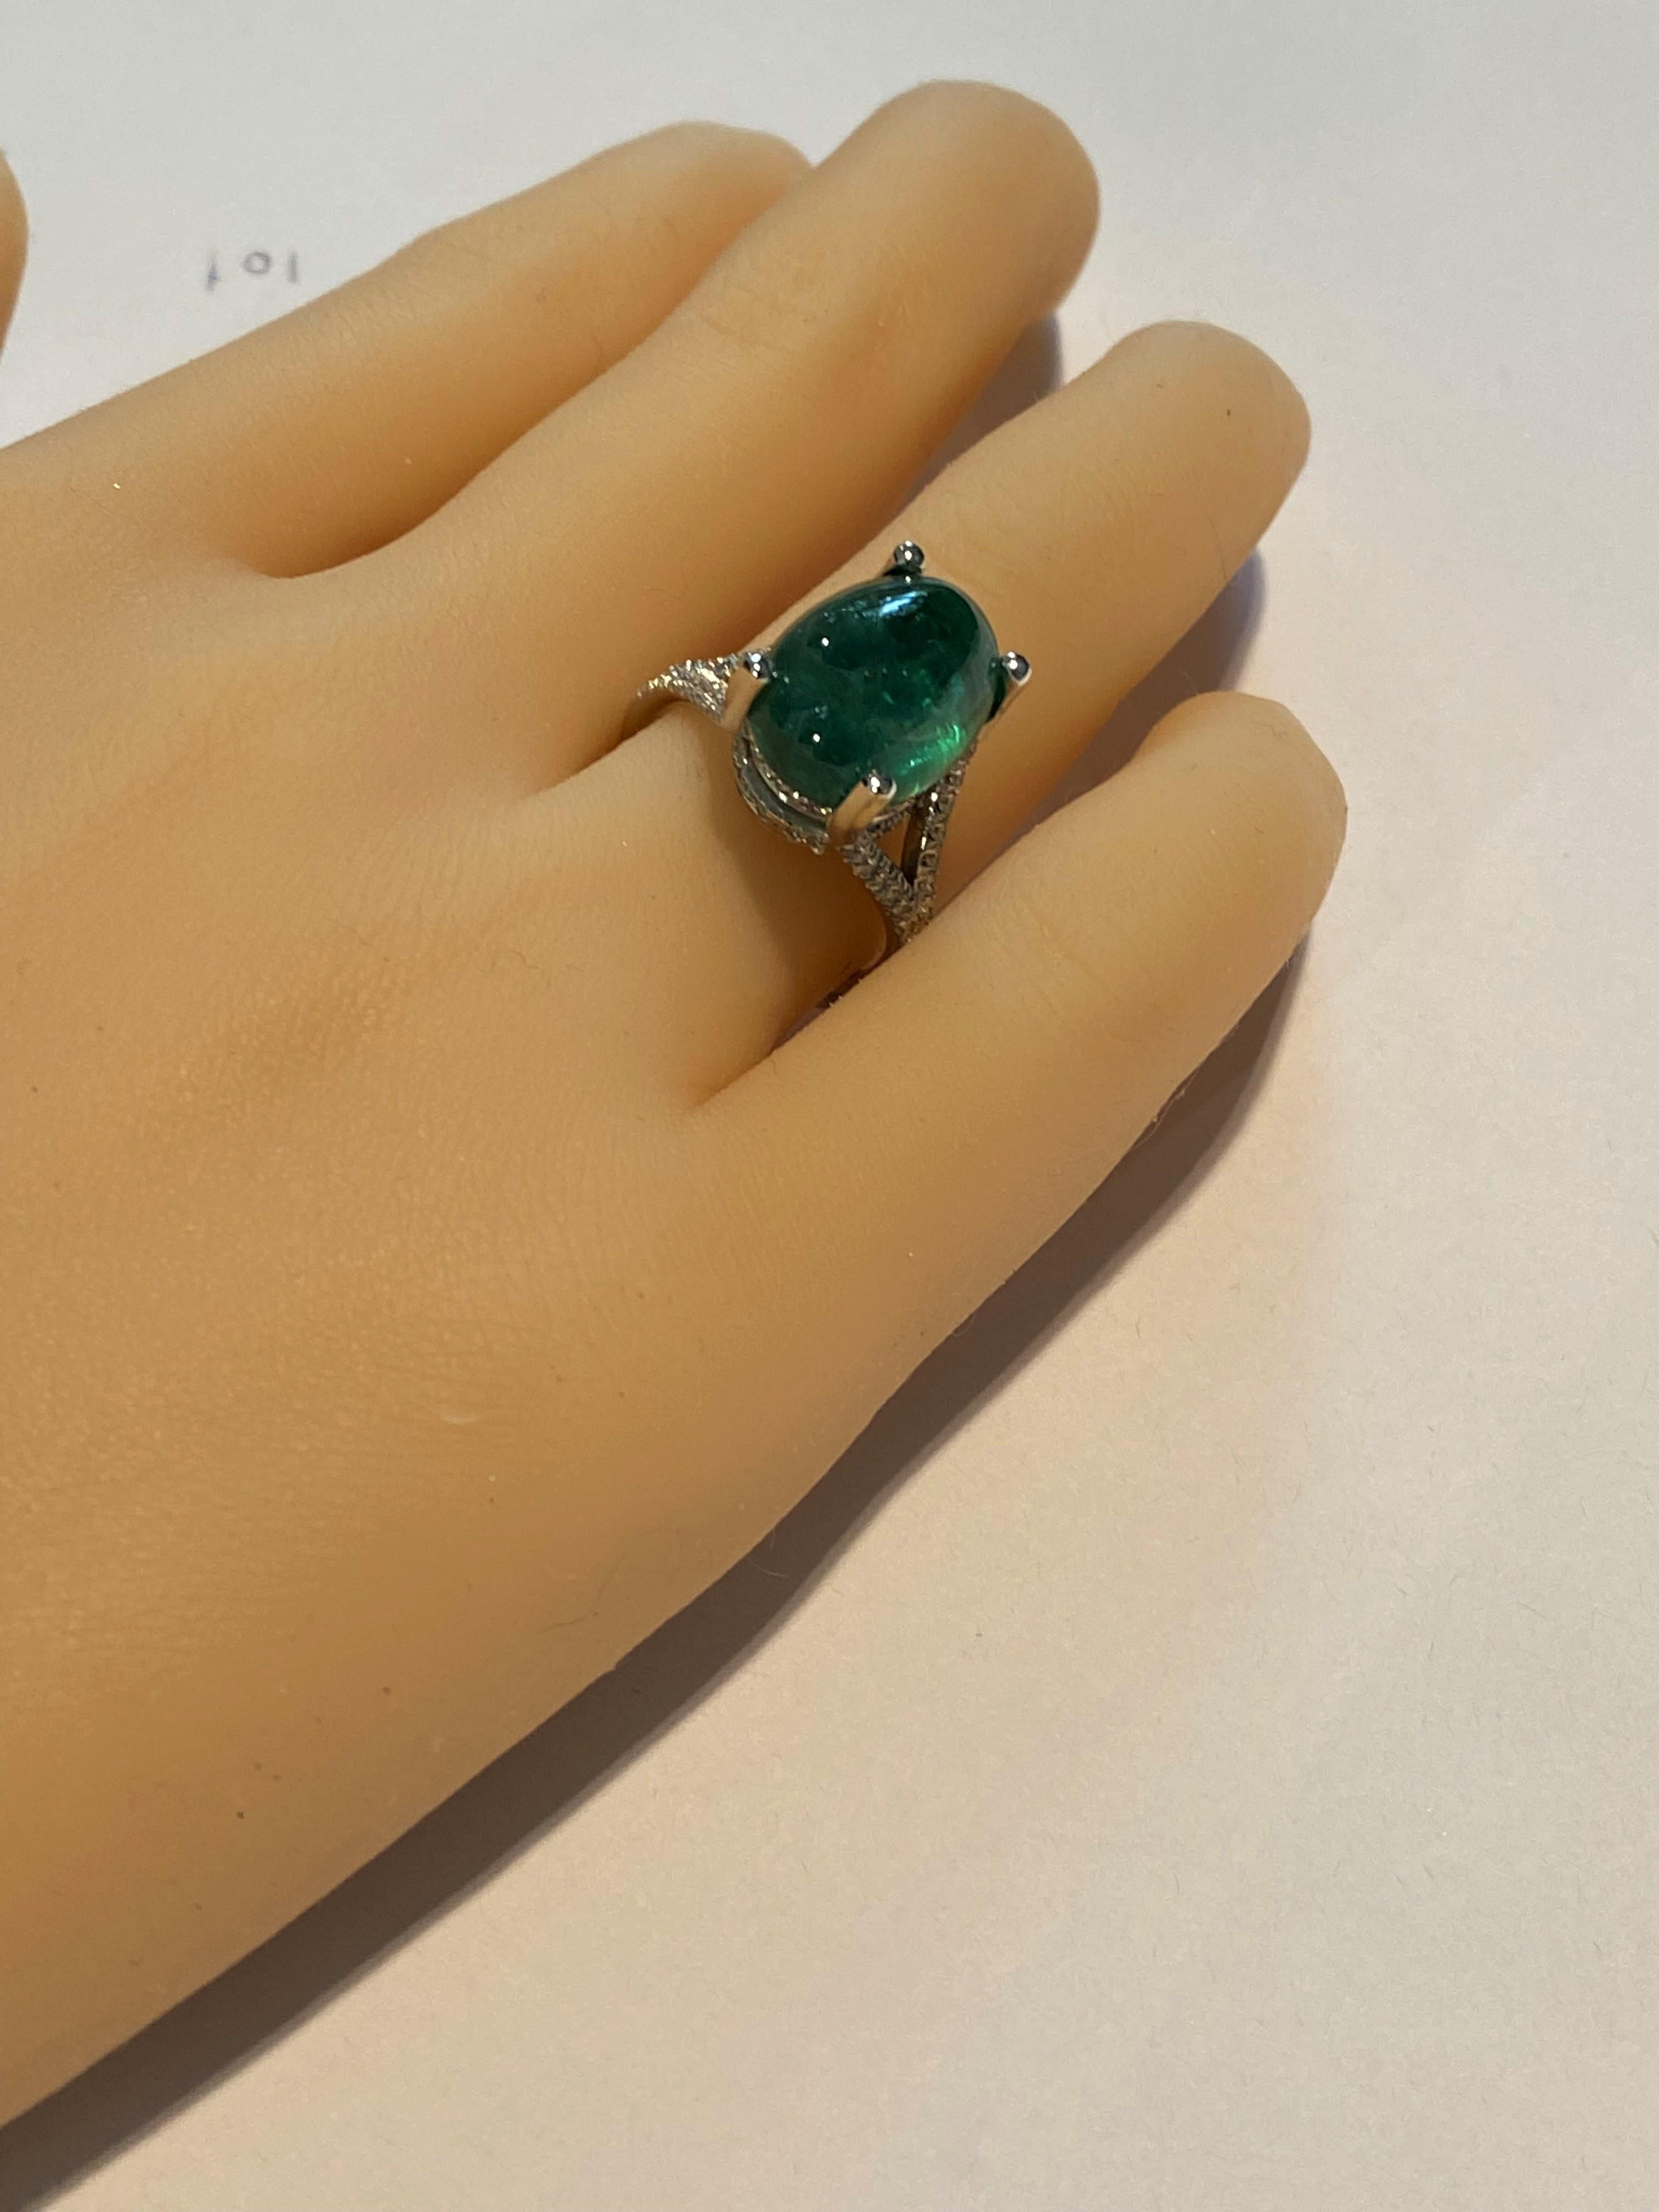 Oval Cut Cabochon Colombia Emerald Diamond Cluster Gold Ring Weighing 11.05 Carat